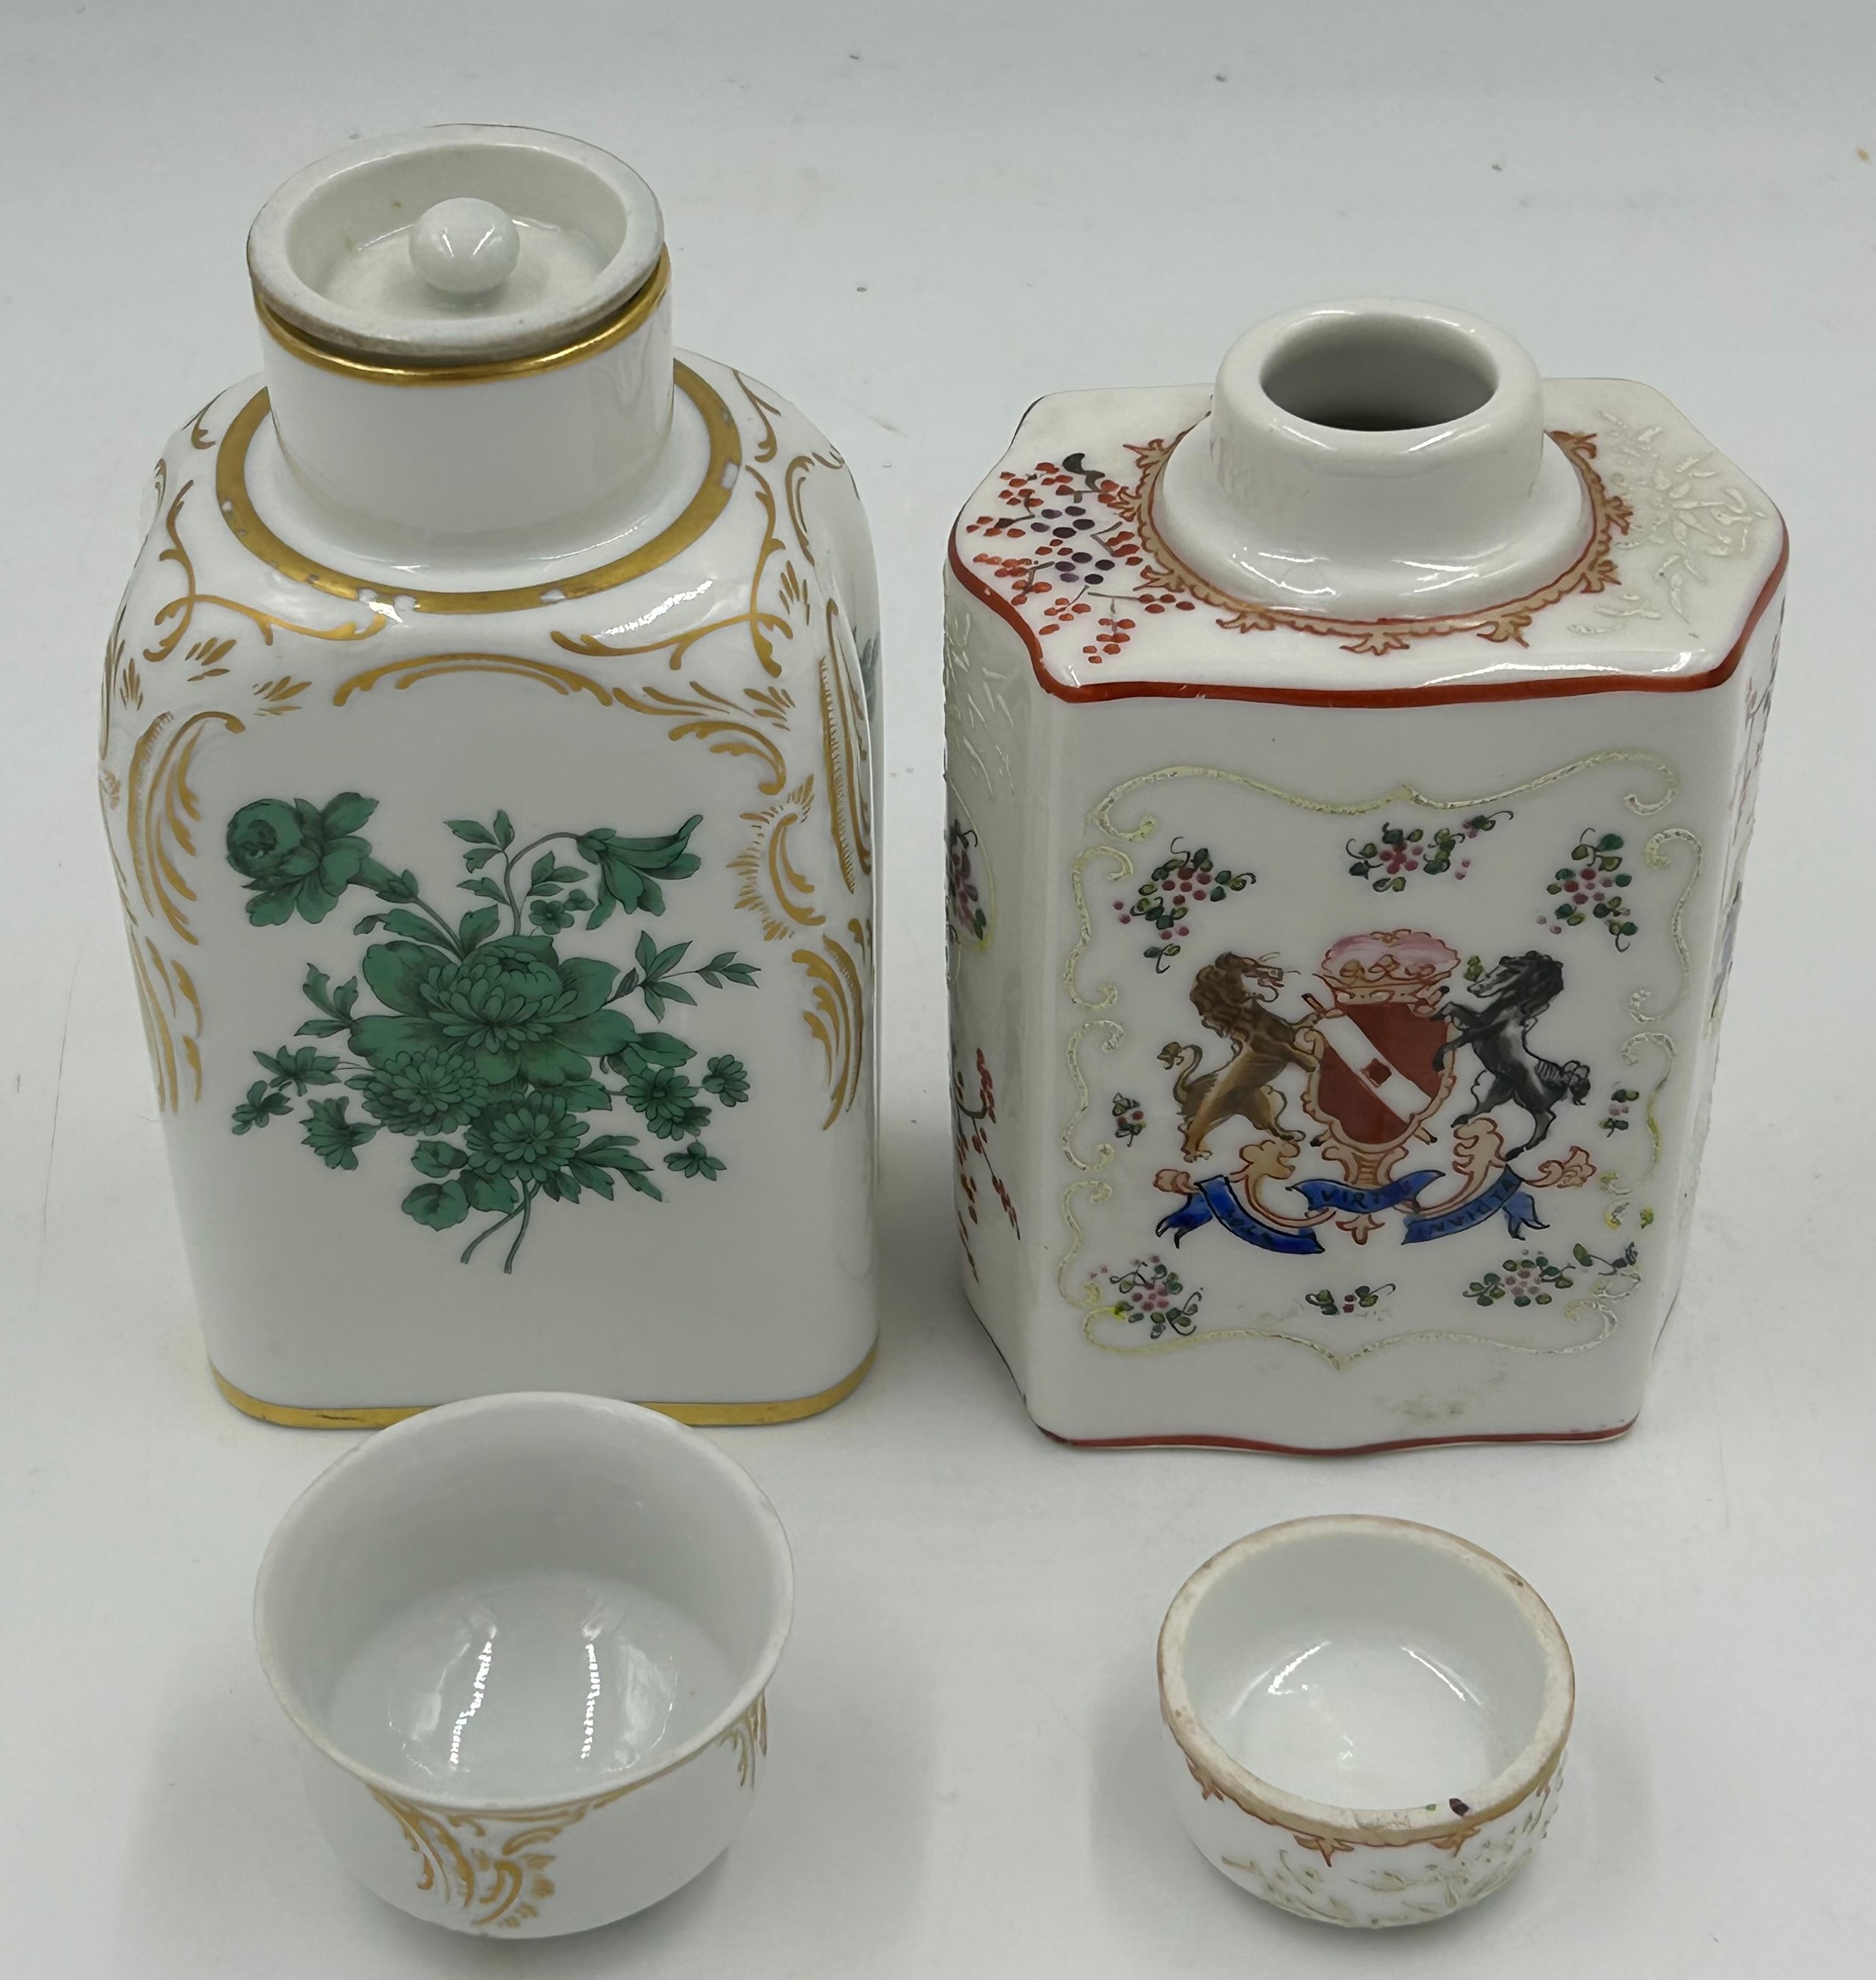 Two 19th century Porcelain Tea Caddies by Samson of Paris, one with armorial crest, one with - Image 4 of 5